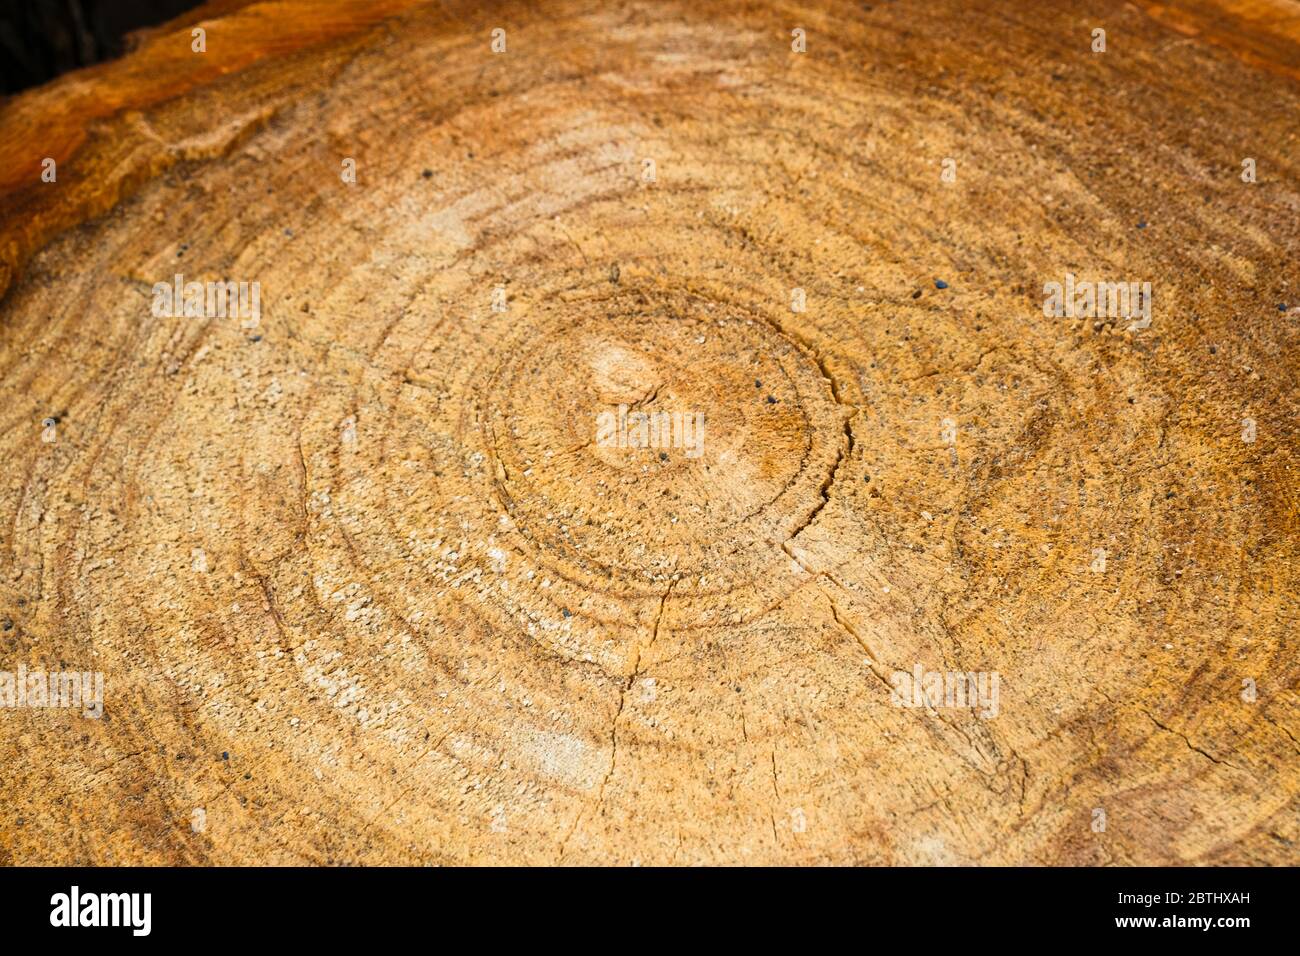 Natural wood texture of cut tree trunk. Close-up wooden cut structure. Willow tree. Sale. Selective focus Stock Photo